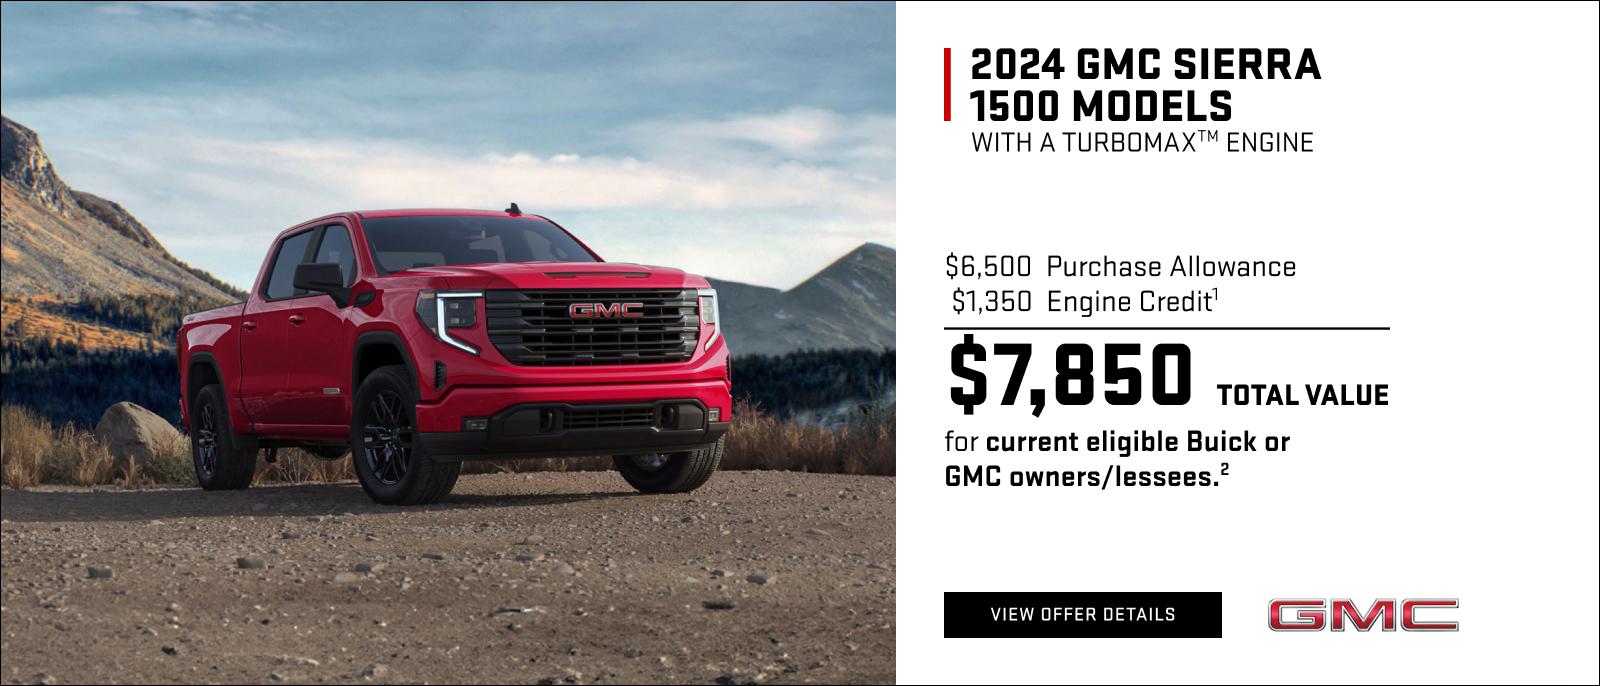 $6,500 Purchase Allowance
$1,350 Engine Credit1
$7,850 Total Value for current eligible Buick or GMC owners/lessees.2